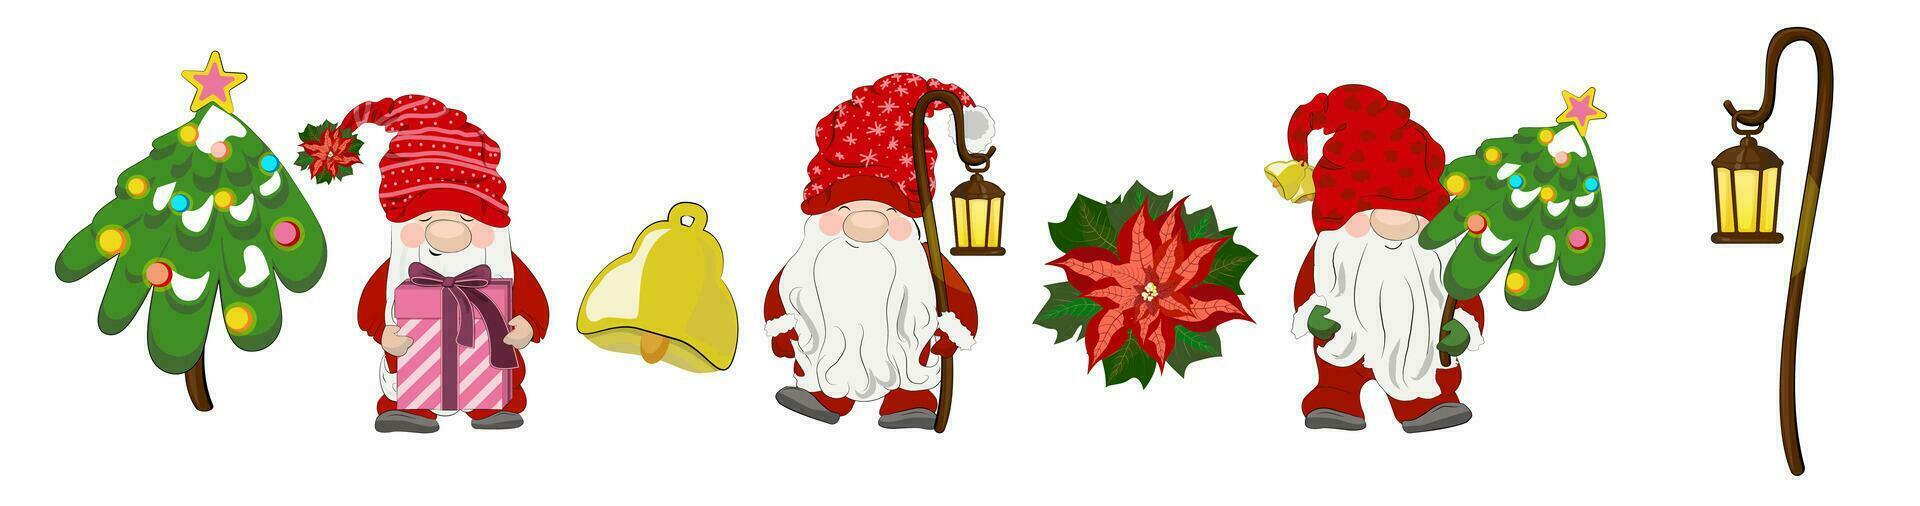 Collection of Christmas gnomes with festive decor elements. vector